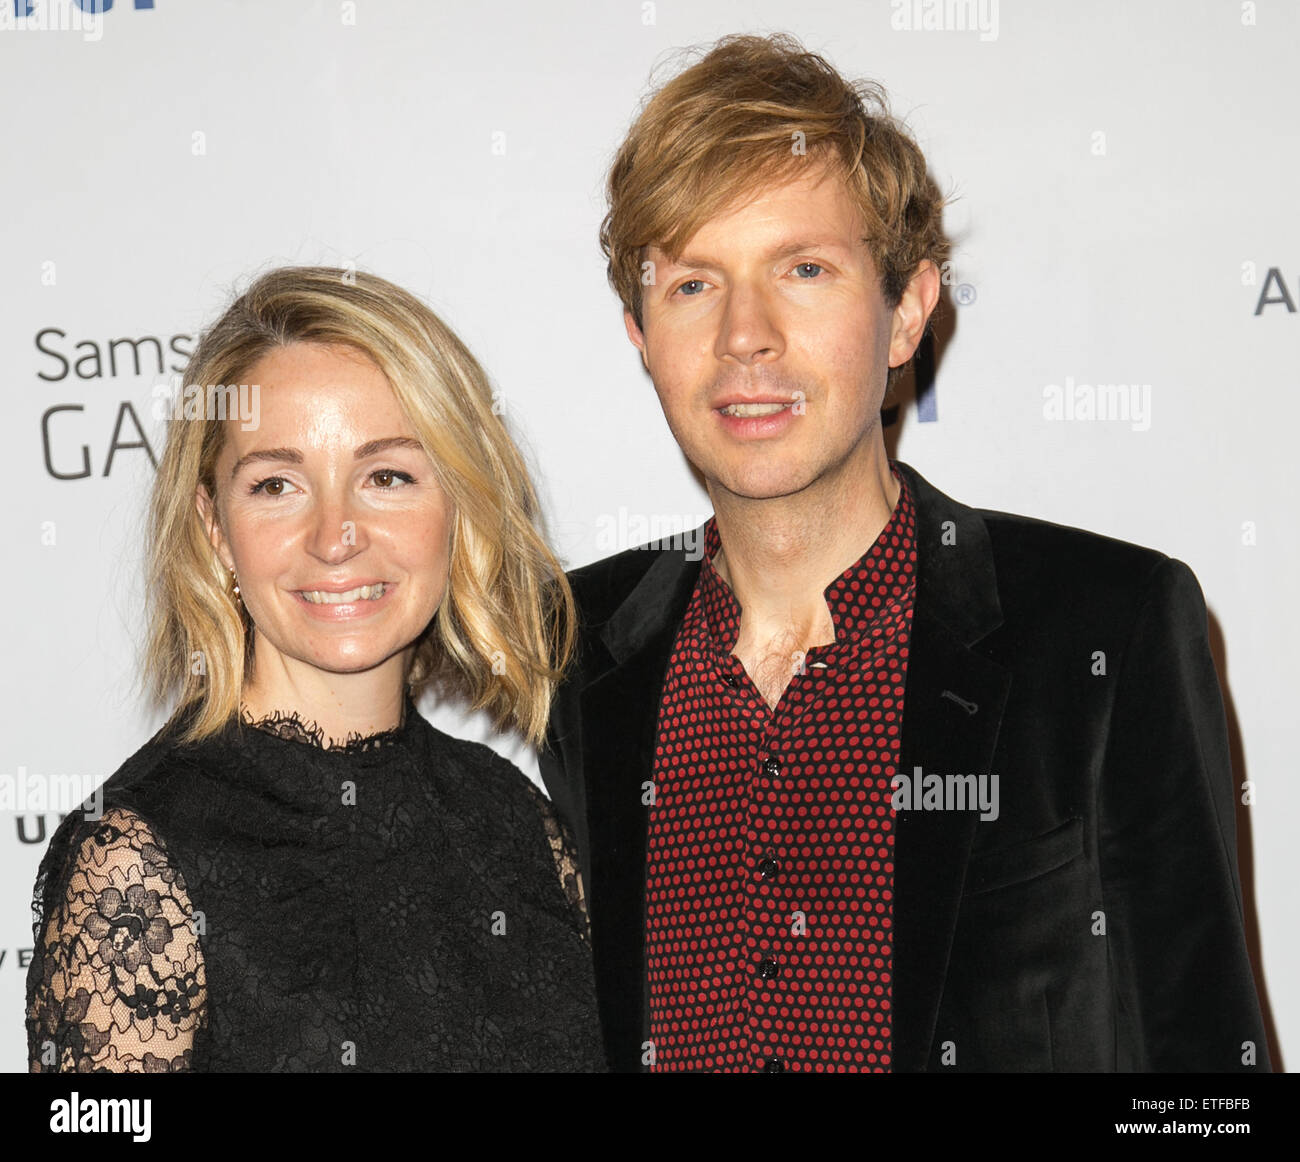 Celebrities attend Universal Music Group’s Grammy After Party presented by American Airlines and Citi at The Theatre at Ace Hotel.  Featuring: Marissa Ribisi, Beck Where: Los Angeles, California, United States When: 08 Feb 2015 Credit: Brian To/WENN.com Stock Photo